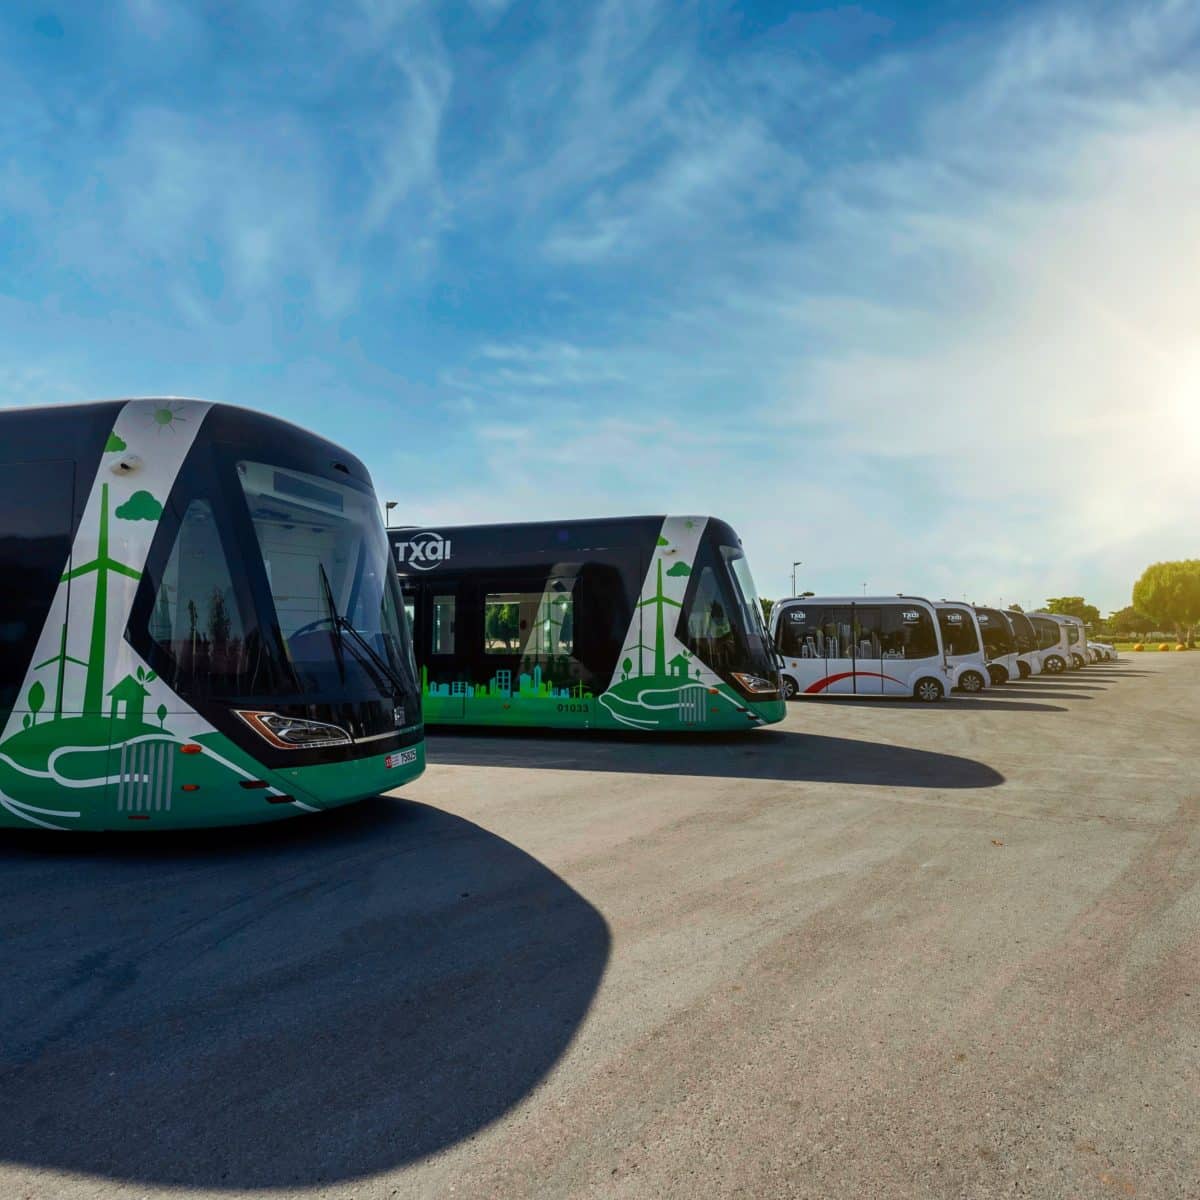 Bayanat uses MENA’s first L4-enabled Autonomous Vehicles to transport visitors at DRIFTx event in Abu Dhabi